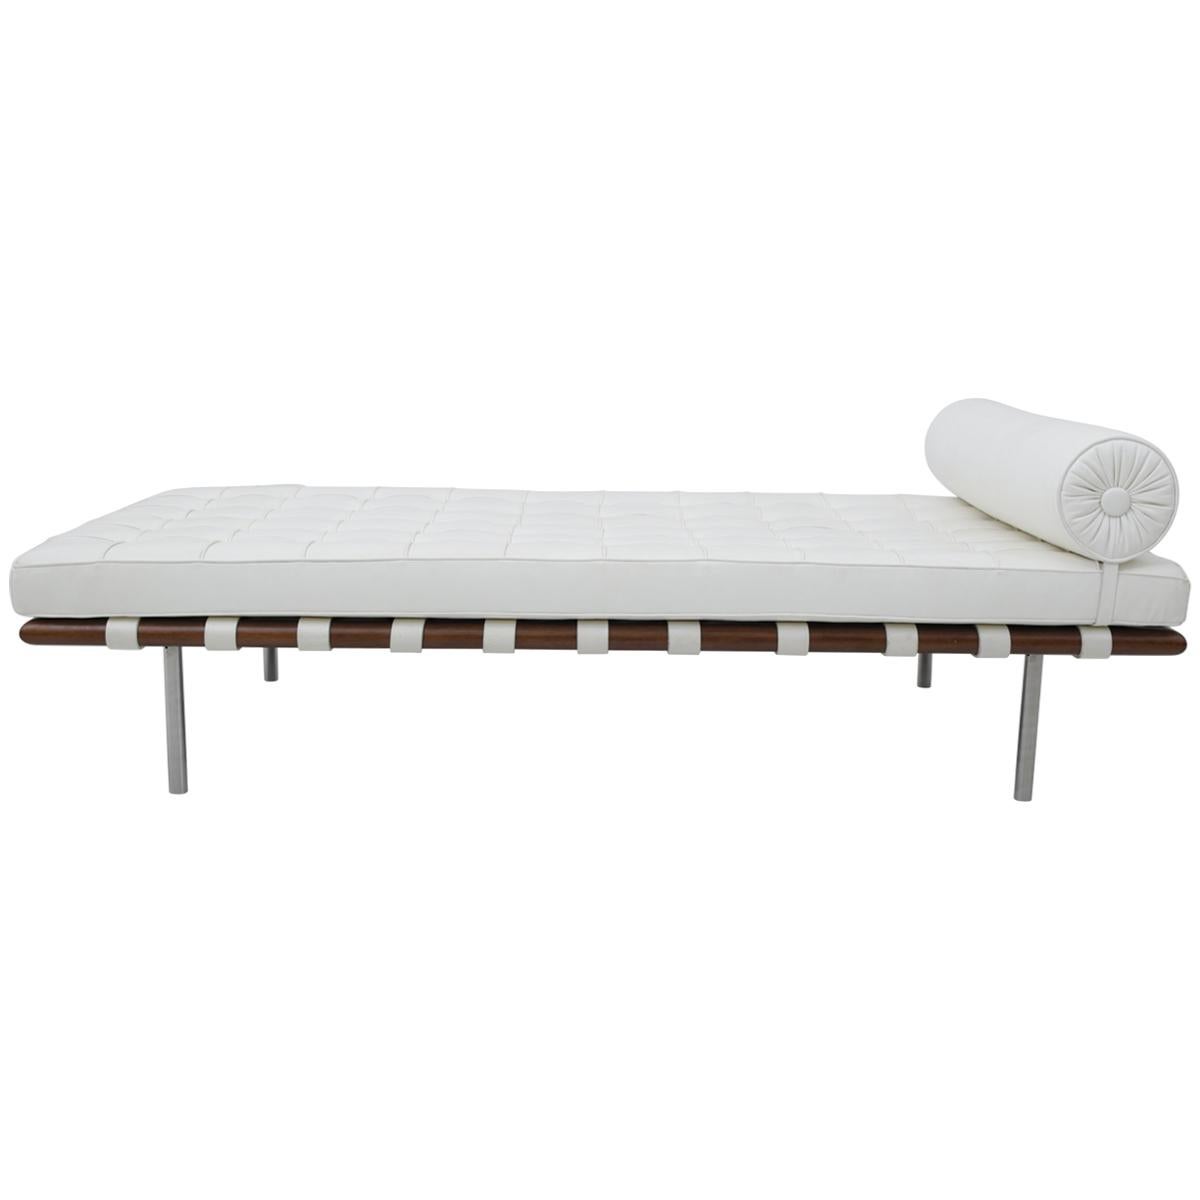 Ludwig Mies van der Rohe Barcelona Daybed for Knoll